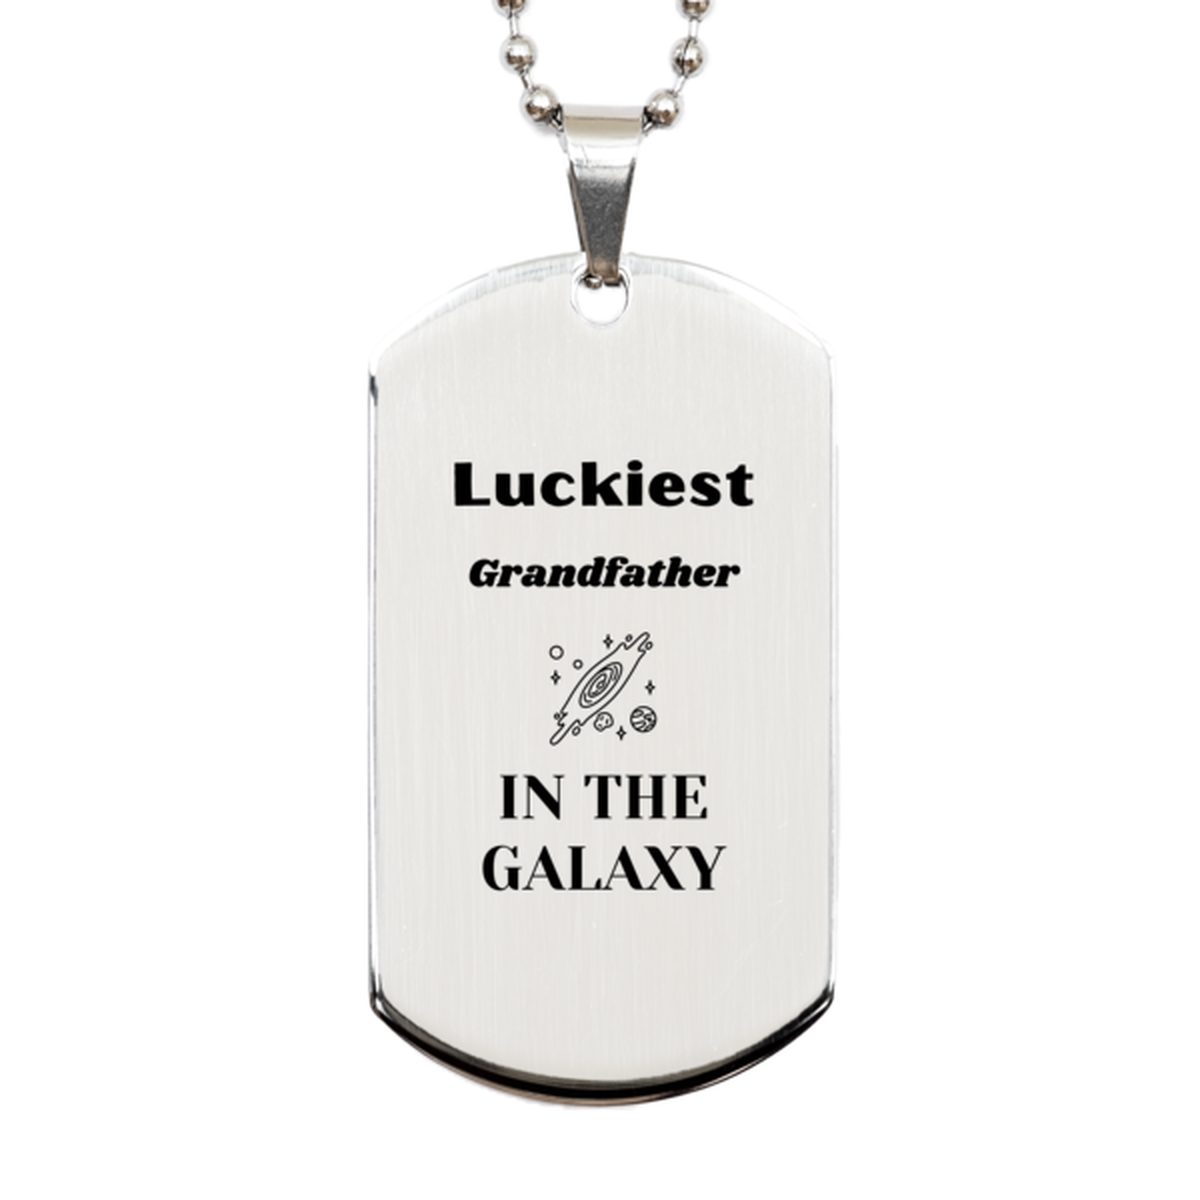 Luckiest Grandfather in the Galaxy, To My Grandfather Engraved Gifts, Christmas Grandfather Silver Dog Tag Gifts, X-mas Birthday Unique Gifts For Grandfather Men Women